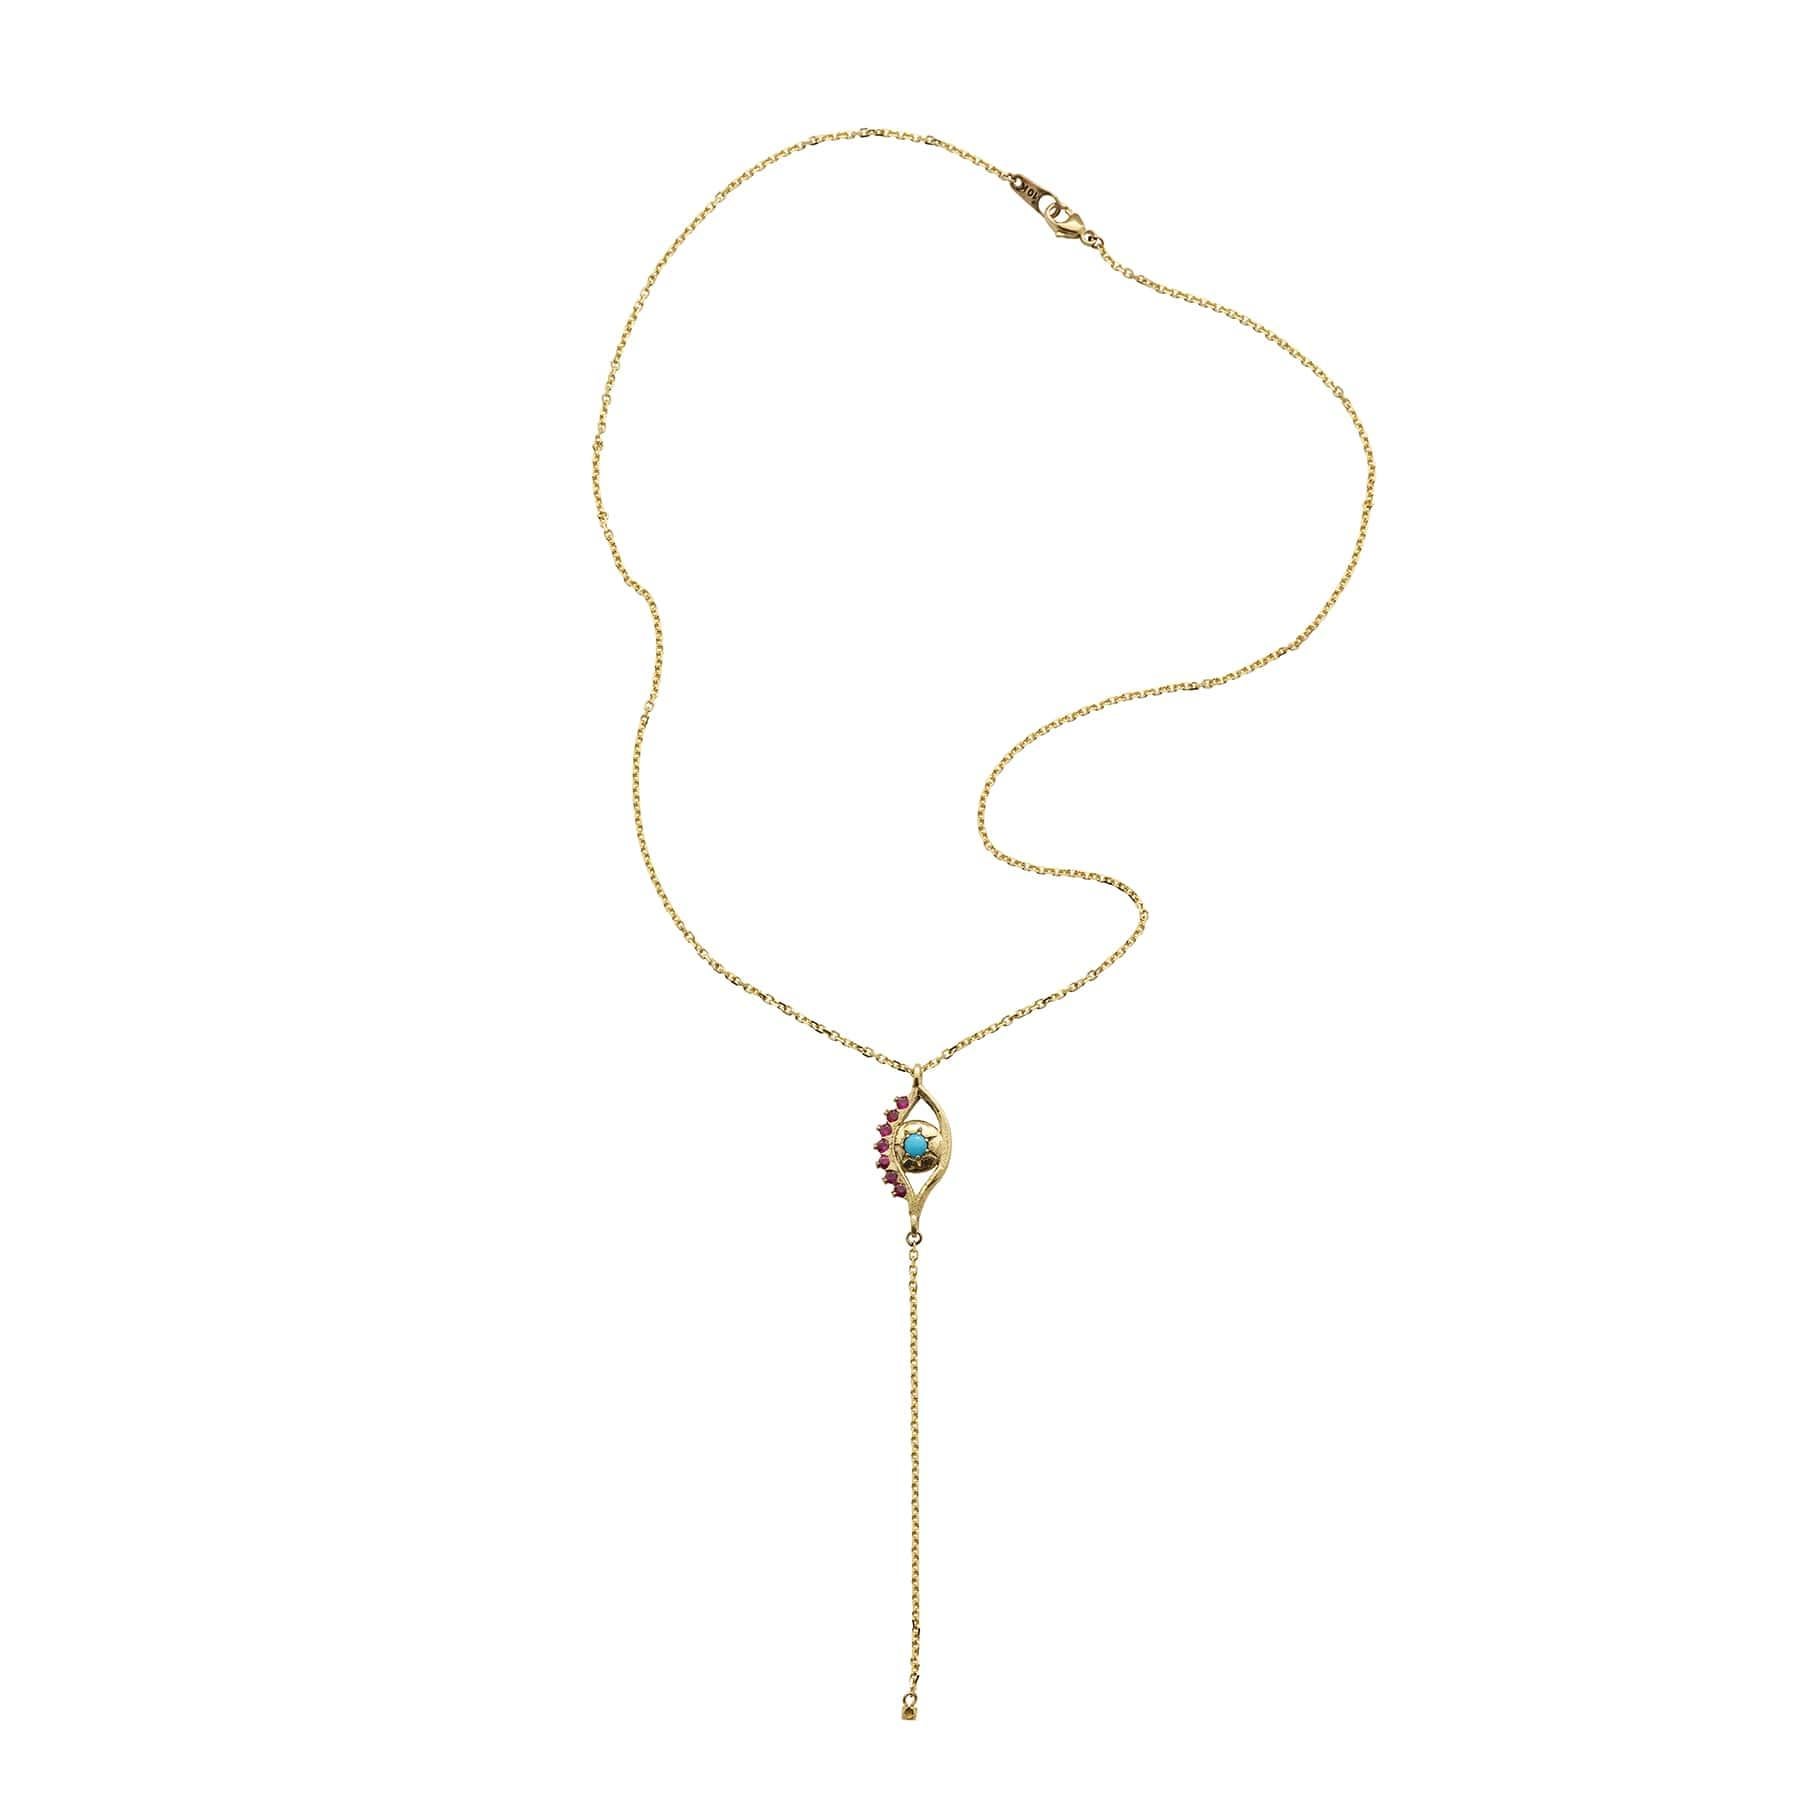 Full of talismanic power, our 18k yellow gold evil eye is centered by a cabochon turquoise gemstone encircled by the engraving of a 7-pointed star. A row of brilliant-cut rubies creates the upper lashes.  To make this ancient symbol more modern, a